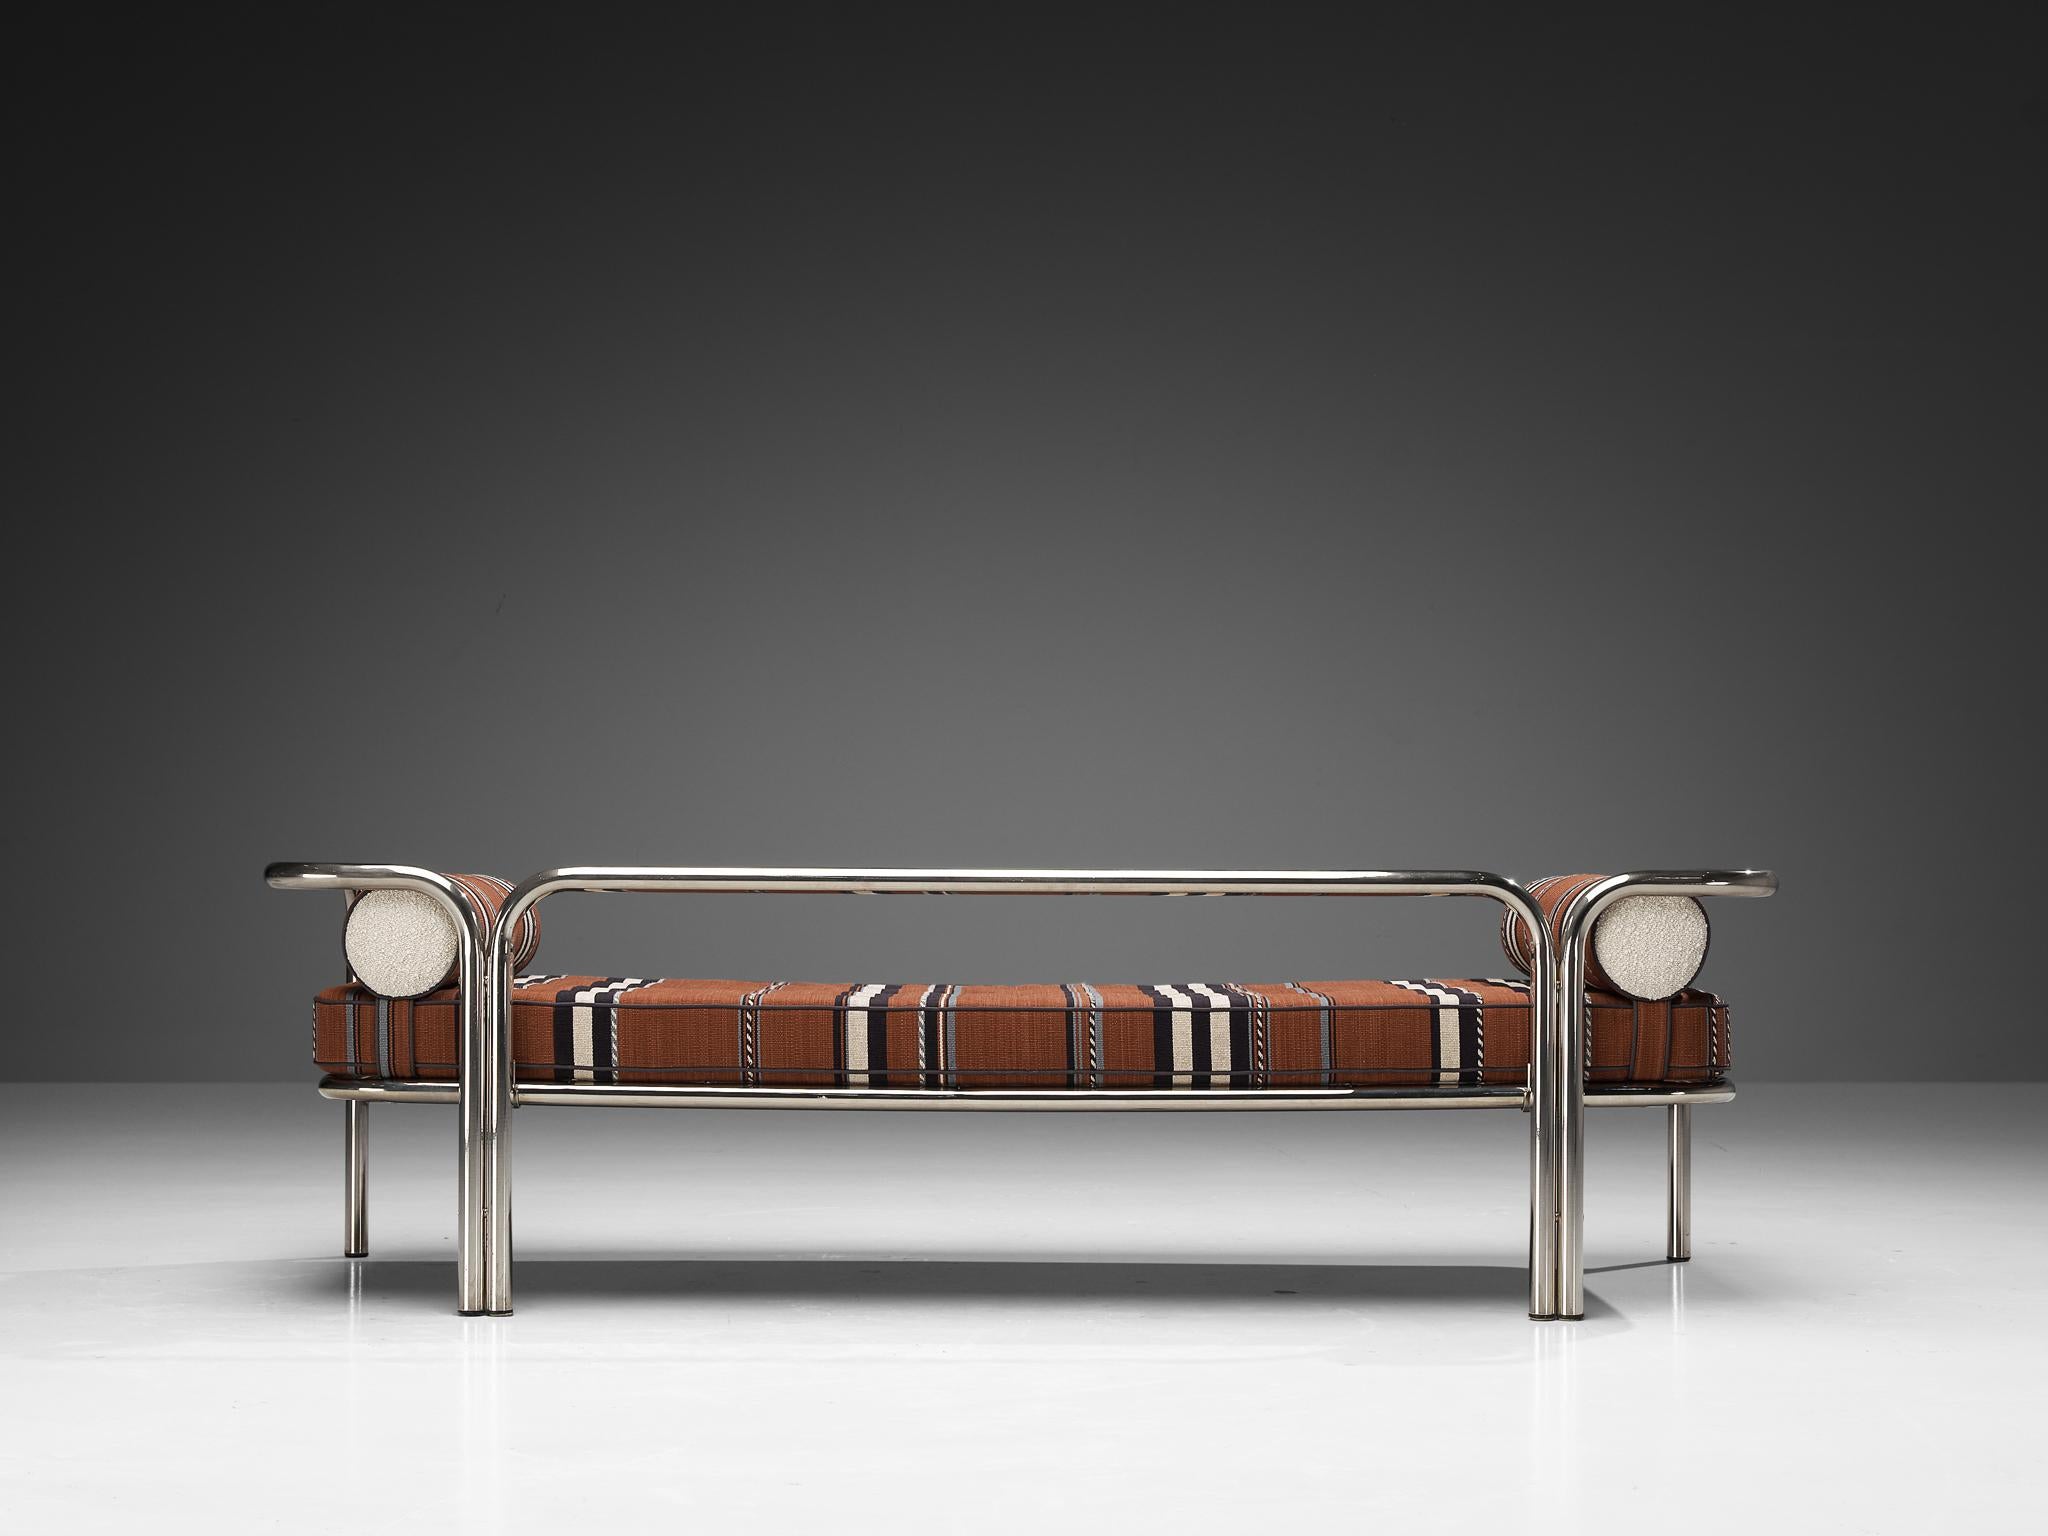 Gae Aulenti for Poltronova 'Locus Solus' Daybed in Chrome-Plated Steel  2